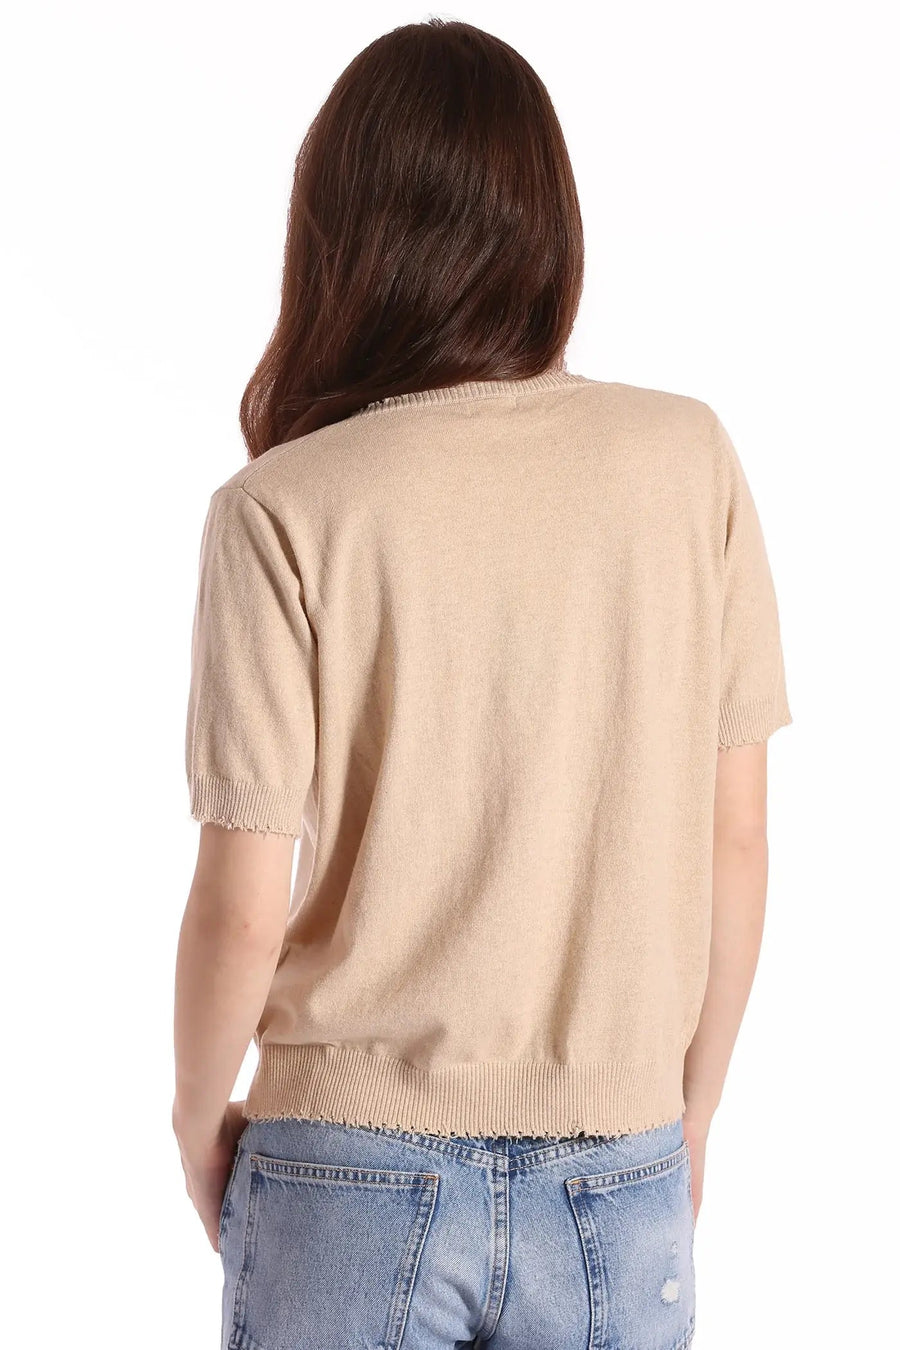 Cotton Cashmere Frayed V-Neck Tee Brown Sugar Top - Tees Minnie Rose 